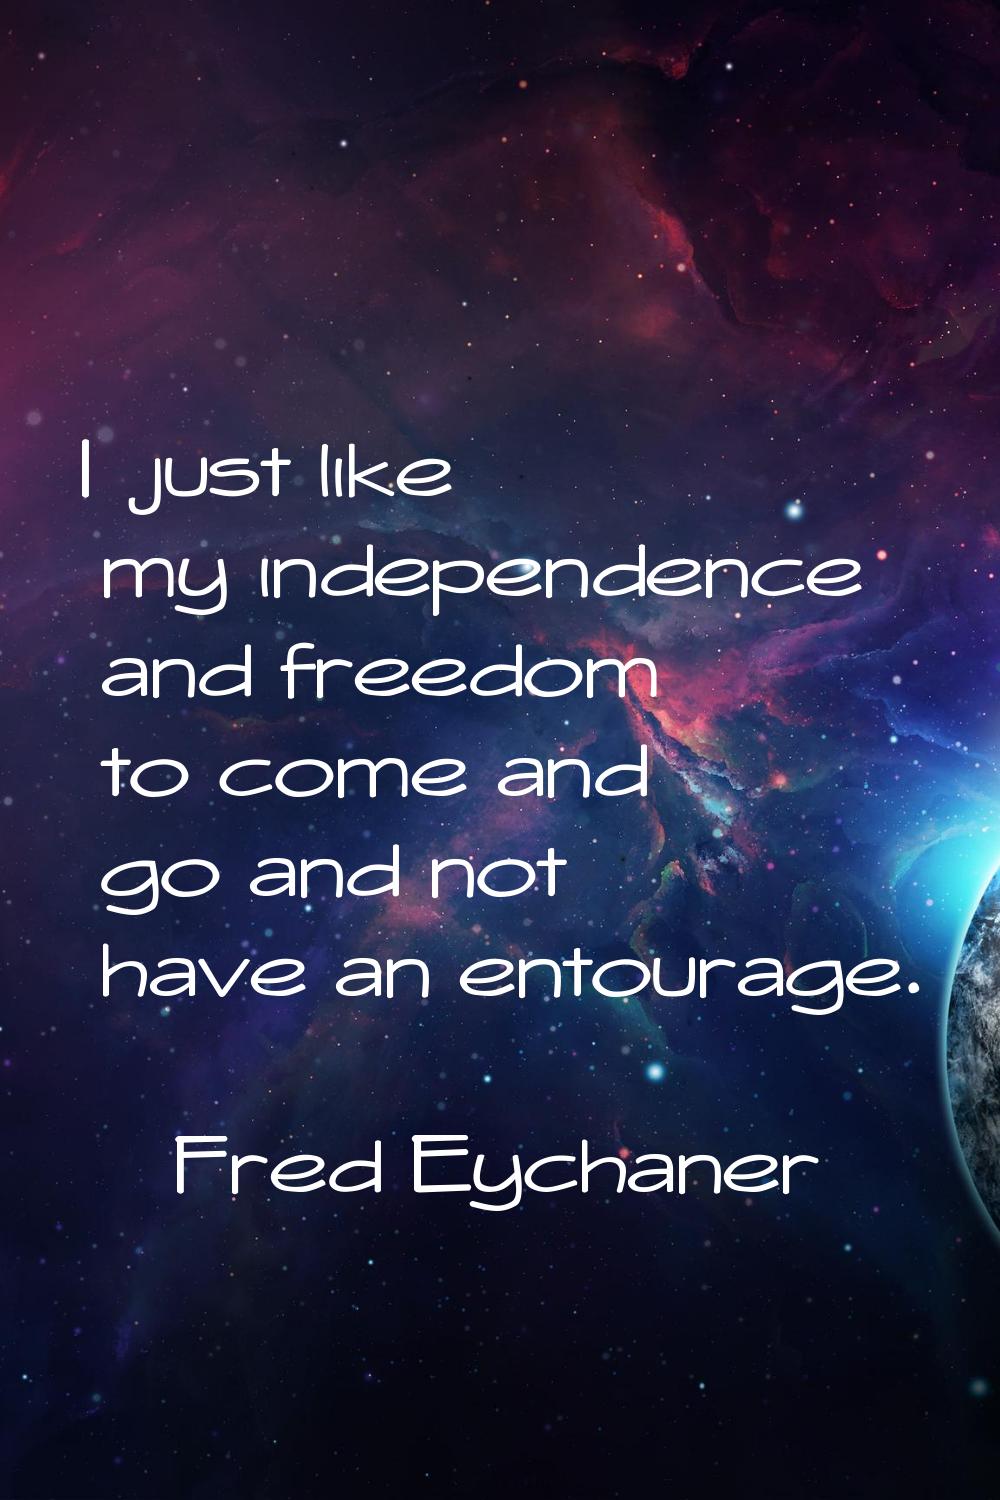 I just like my independence and freedom to come and go and not have an entourage.